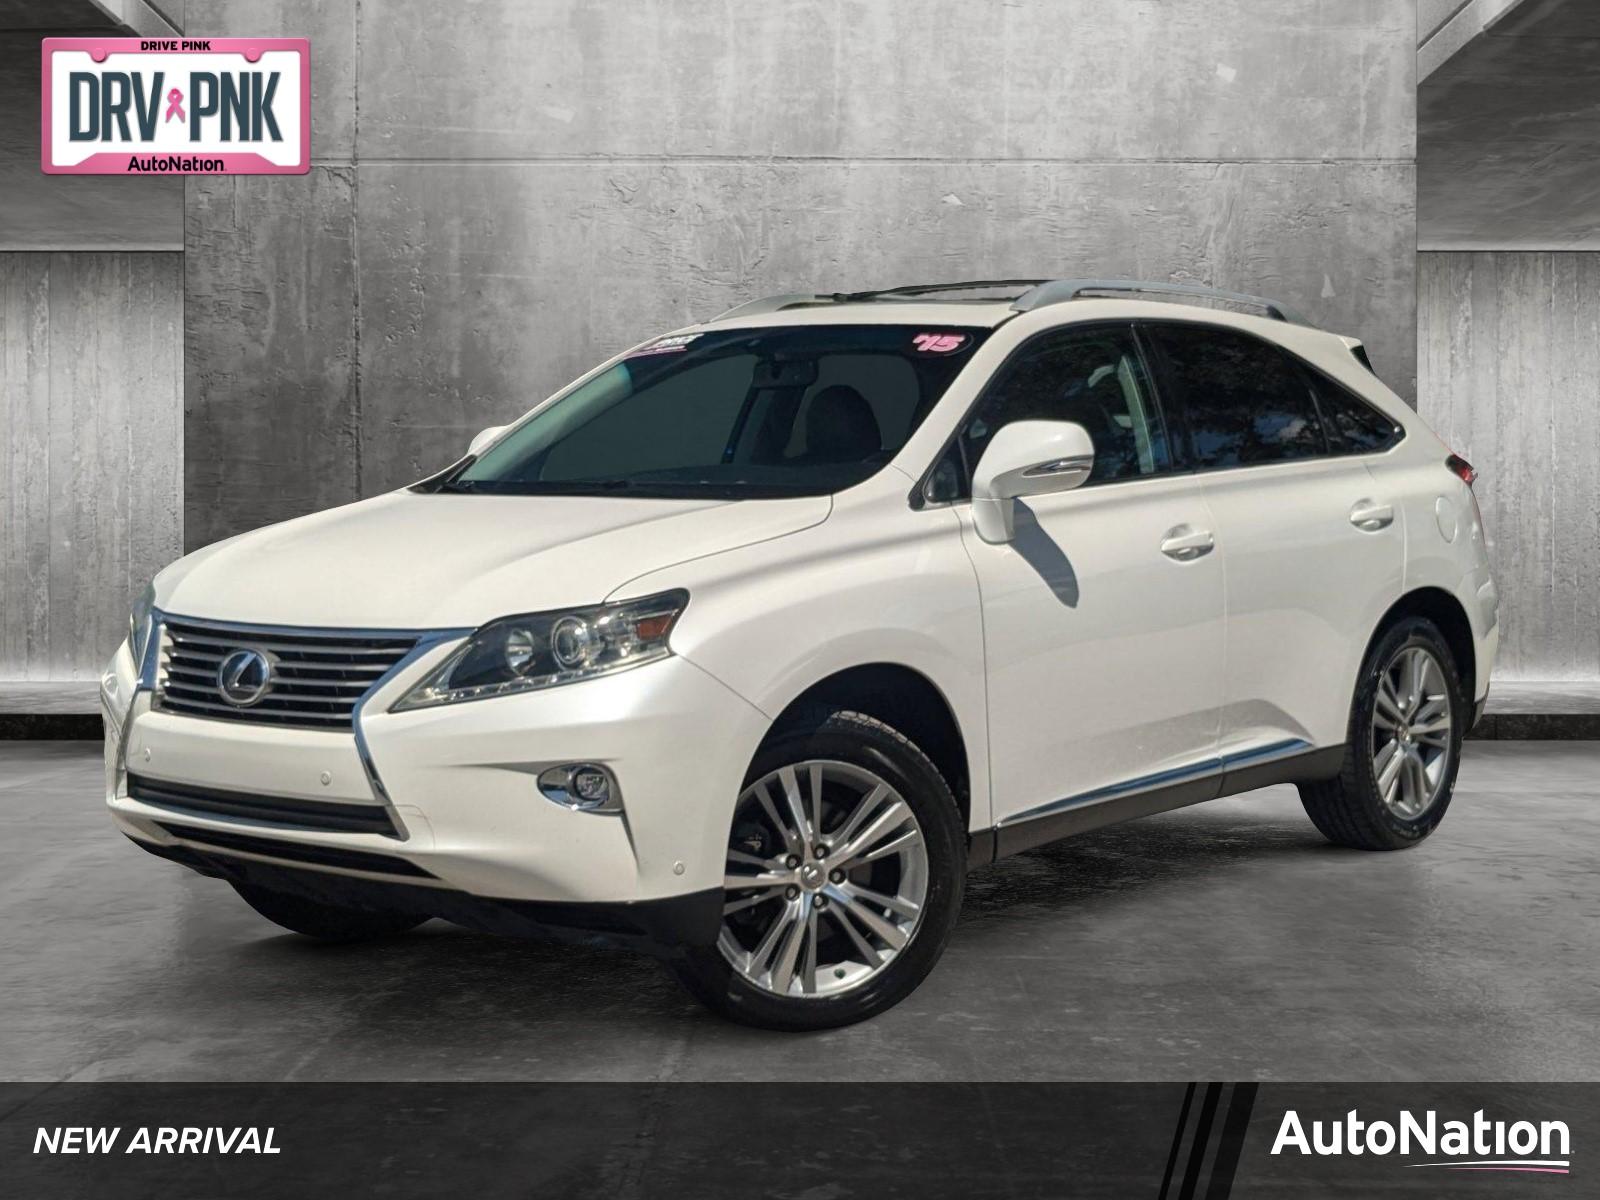 2015 Lexus RX 350 Vehicle Photo in Clearwater, FL 33765